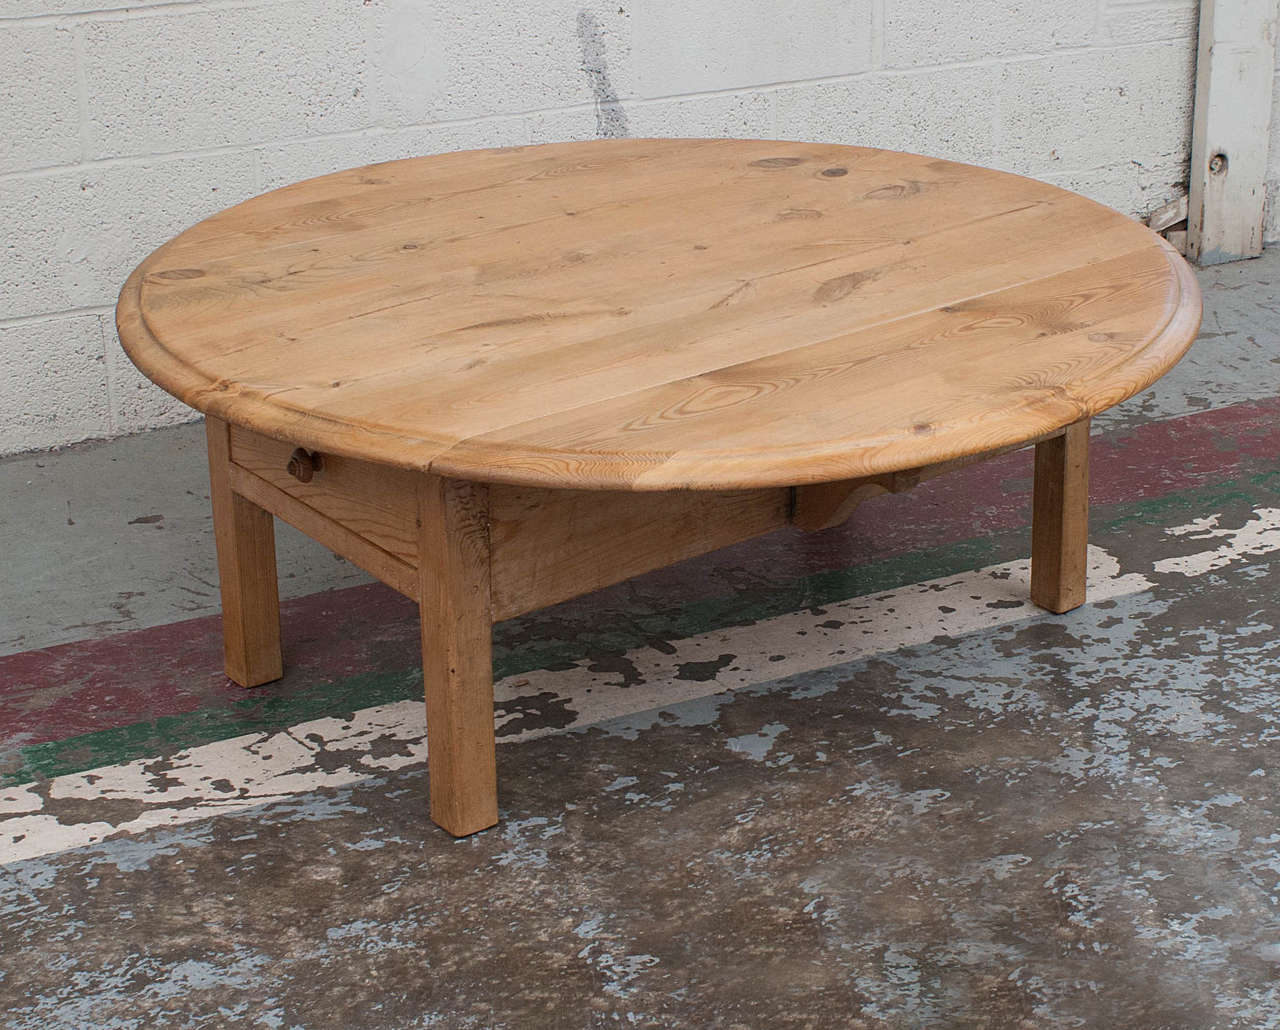 A pine drop-leaf table cut down to coffee table height featuring straight legs, a softly routed edge to the top, and a deep dovetailed drawer at each end. The butterfly supports beneath the leaves allow this versatile table to be used in three